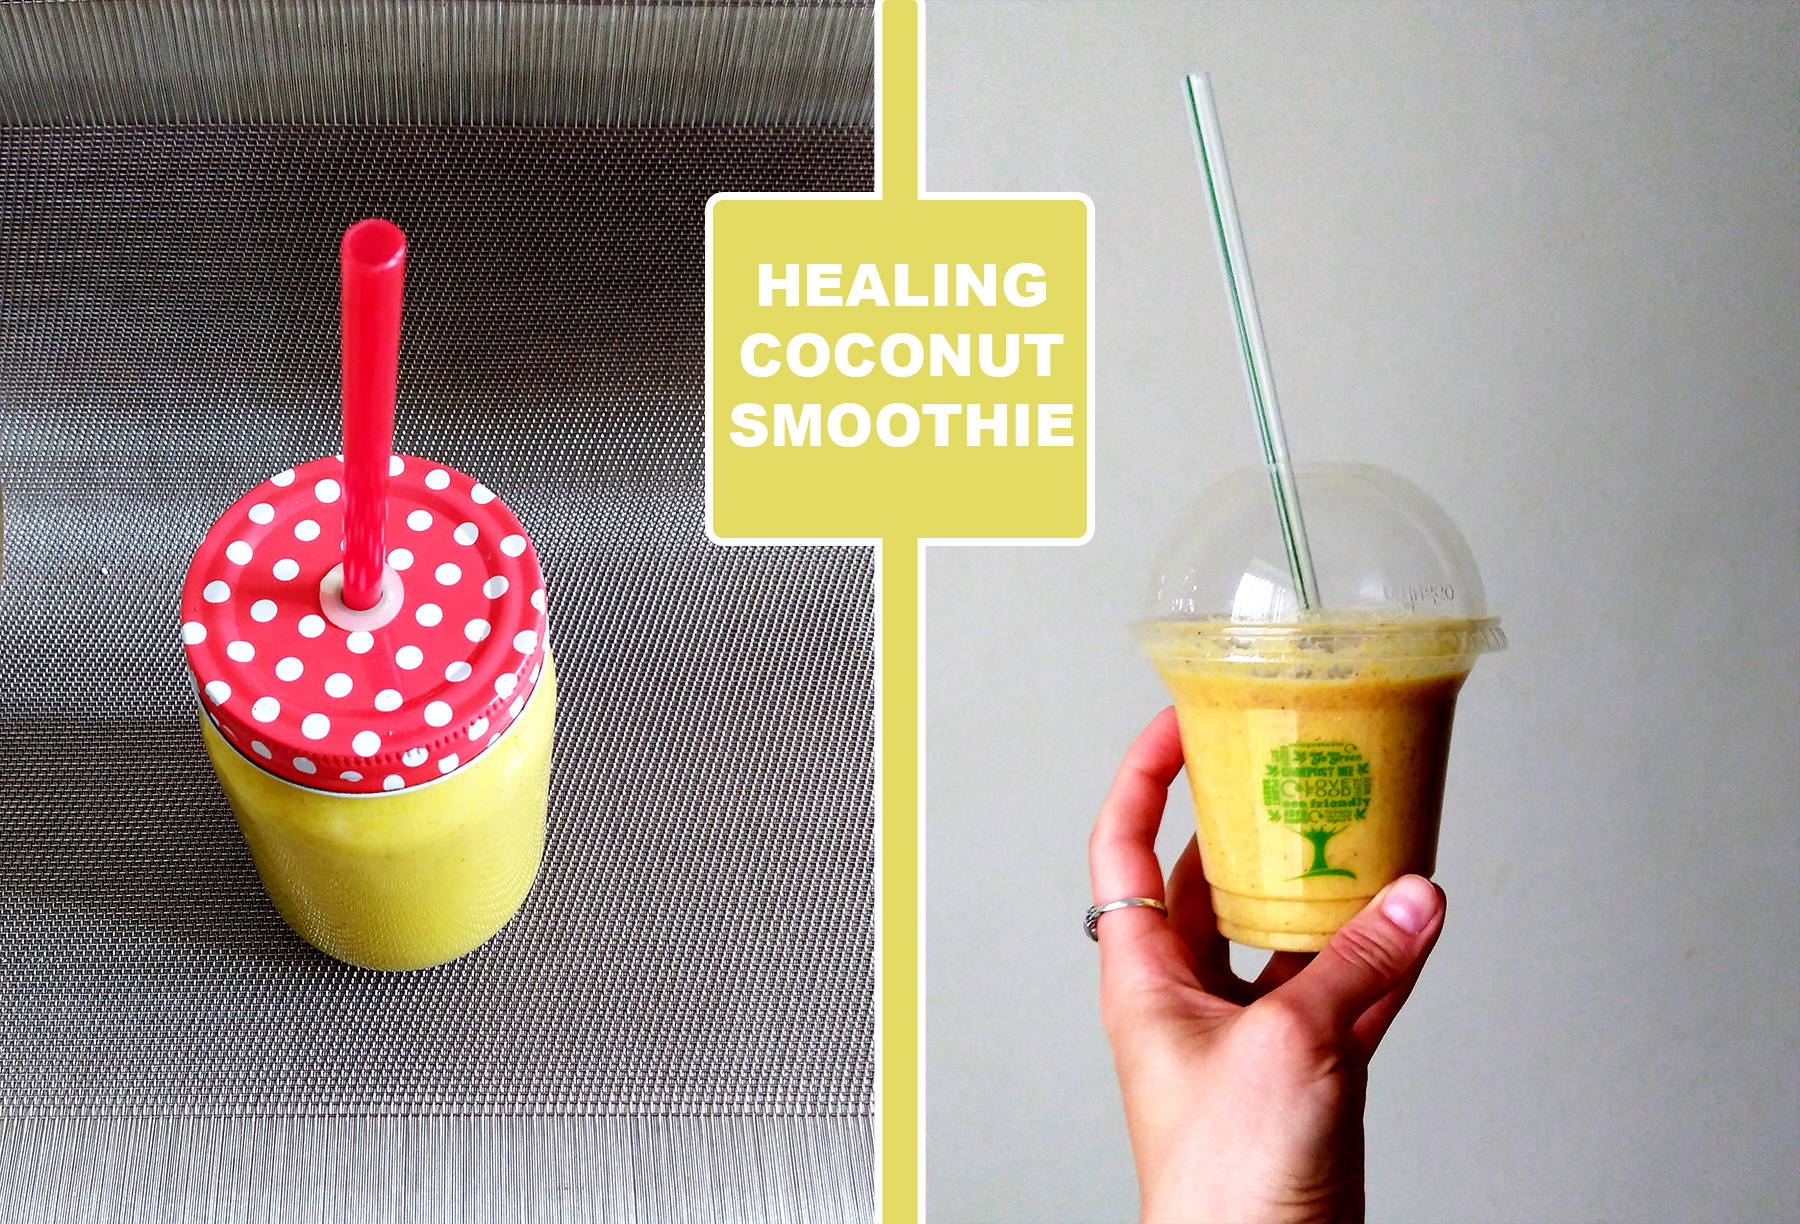 Healing Coconut Smoothie